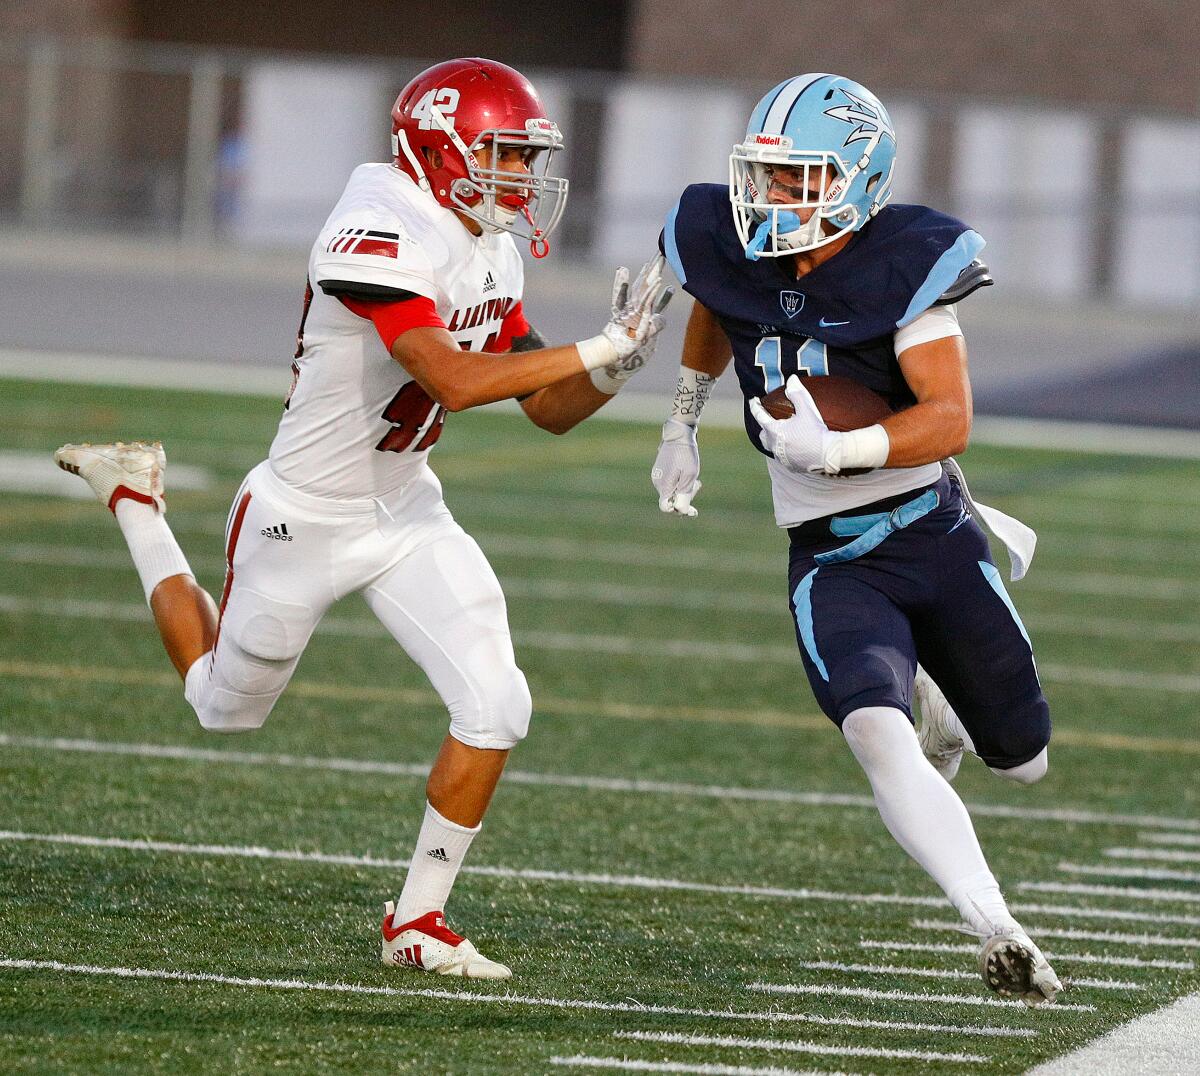 Corona del Mar's Bradley Schlom, pictured running for a first down while Lakewood's Travis Perryman tries to push him out of bounds on Sept. 13, has 11 receiving touchdowns this year.